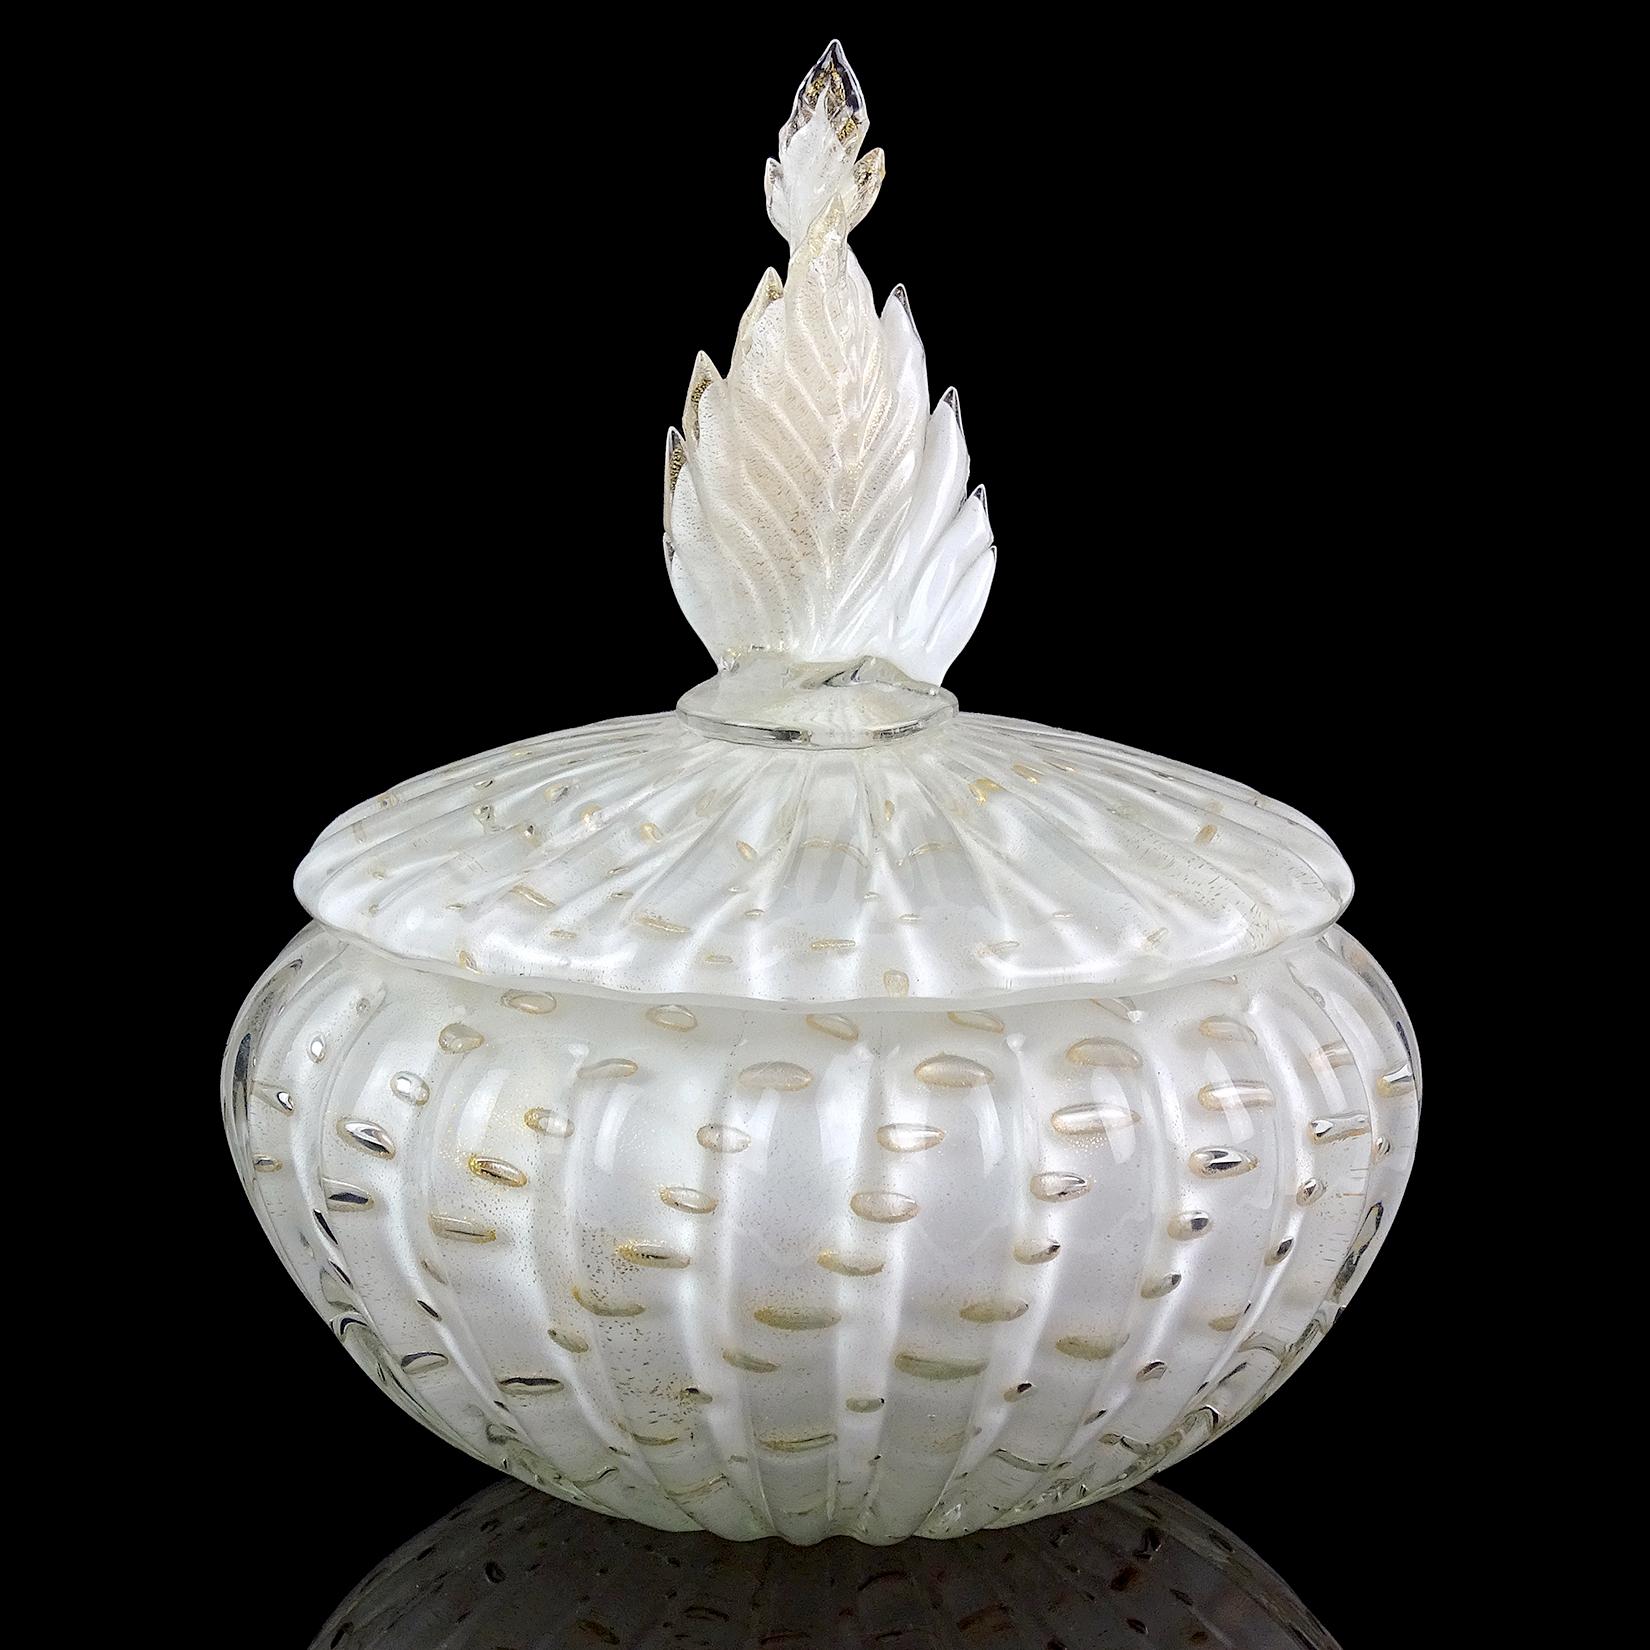 Beautiful vintage Murano hand blown white, controlled bubbles and gold flecks Italian art glass vanity powder or jewelry box. Documented to designer Alfredo Barbini, circa 1950s. The lidded jar has a ribbed body with twisting leaf on the top. The